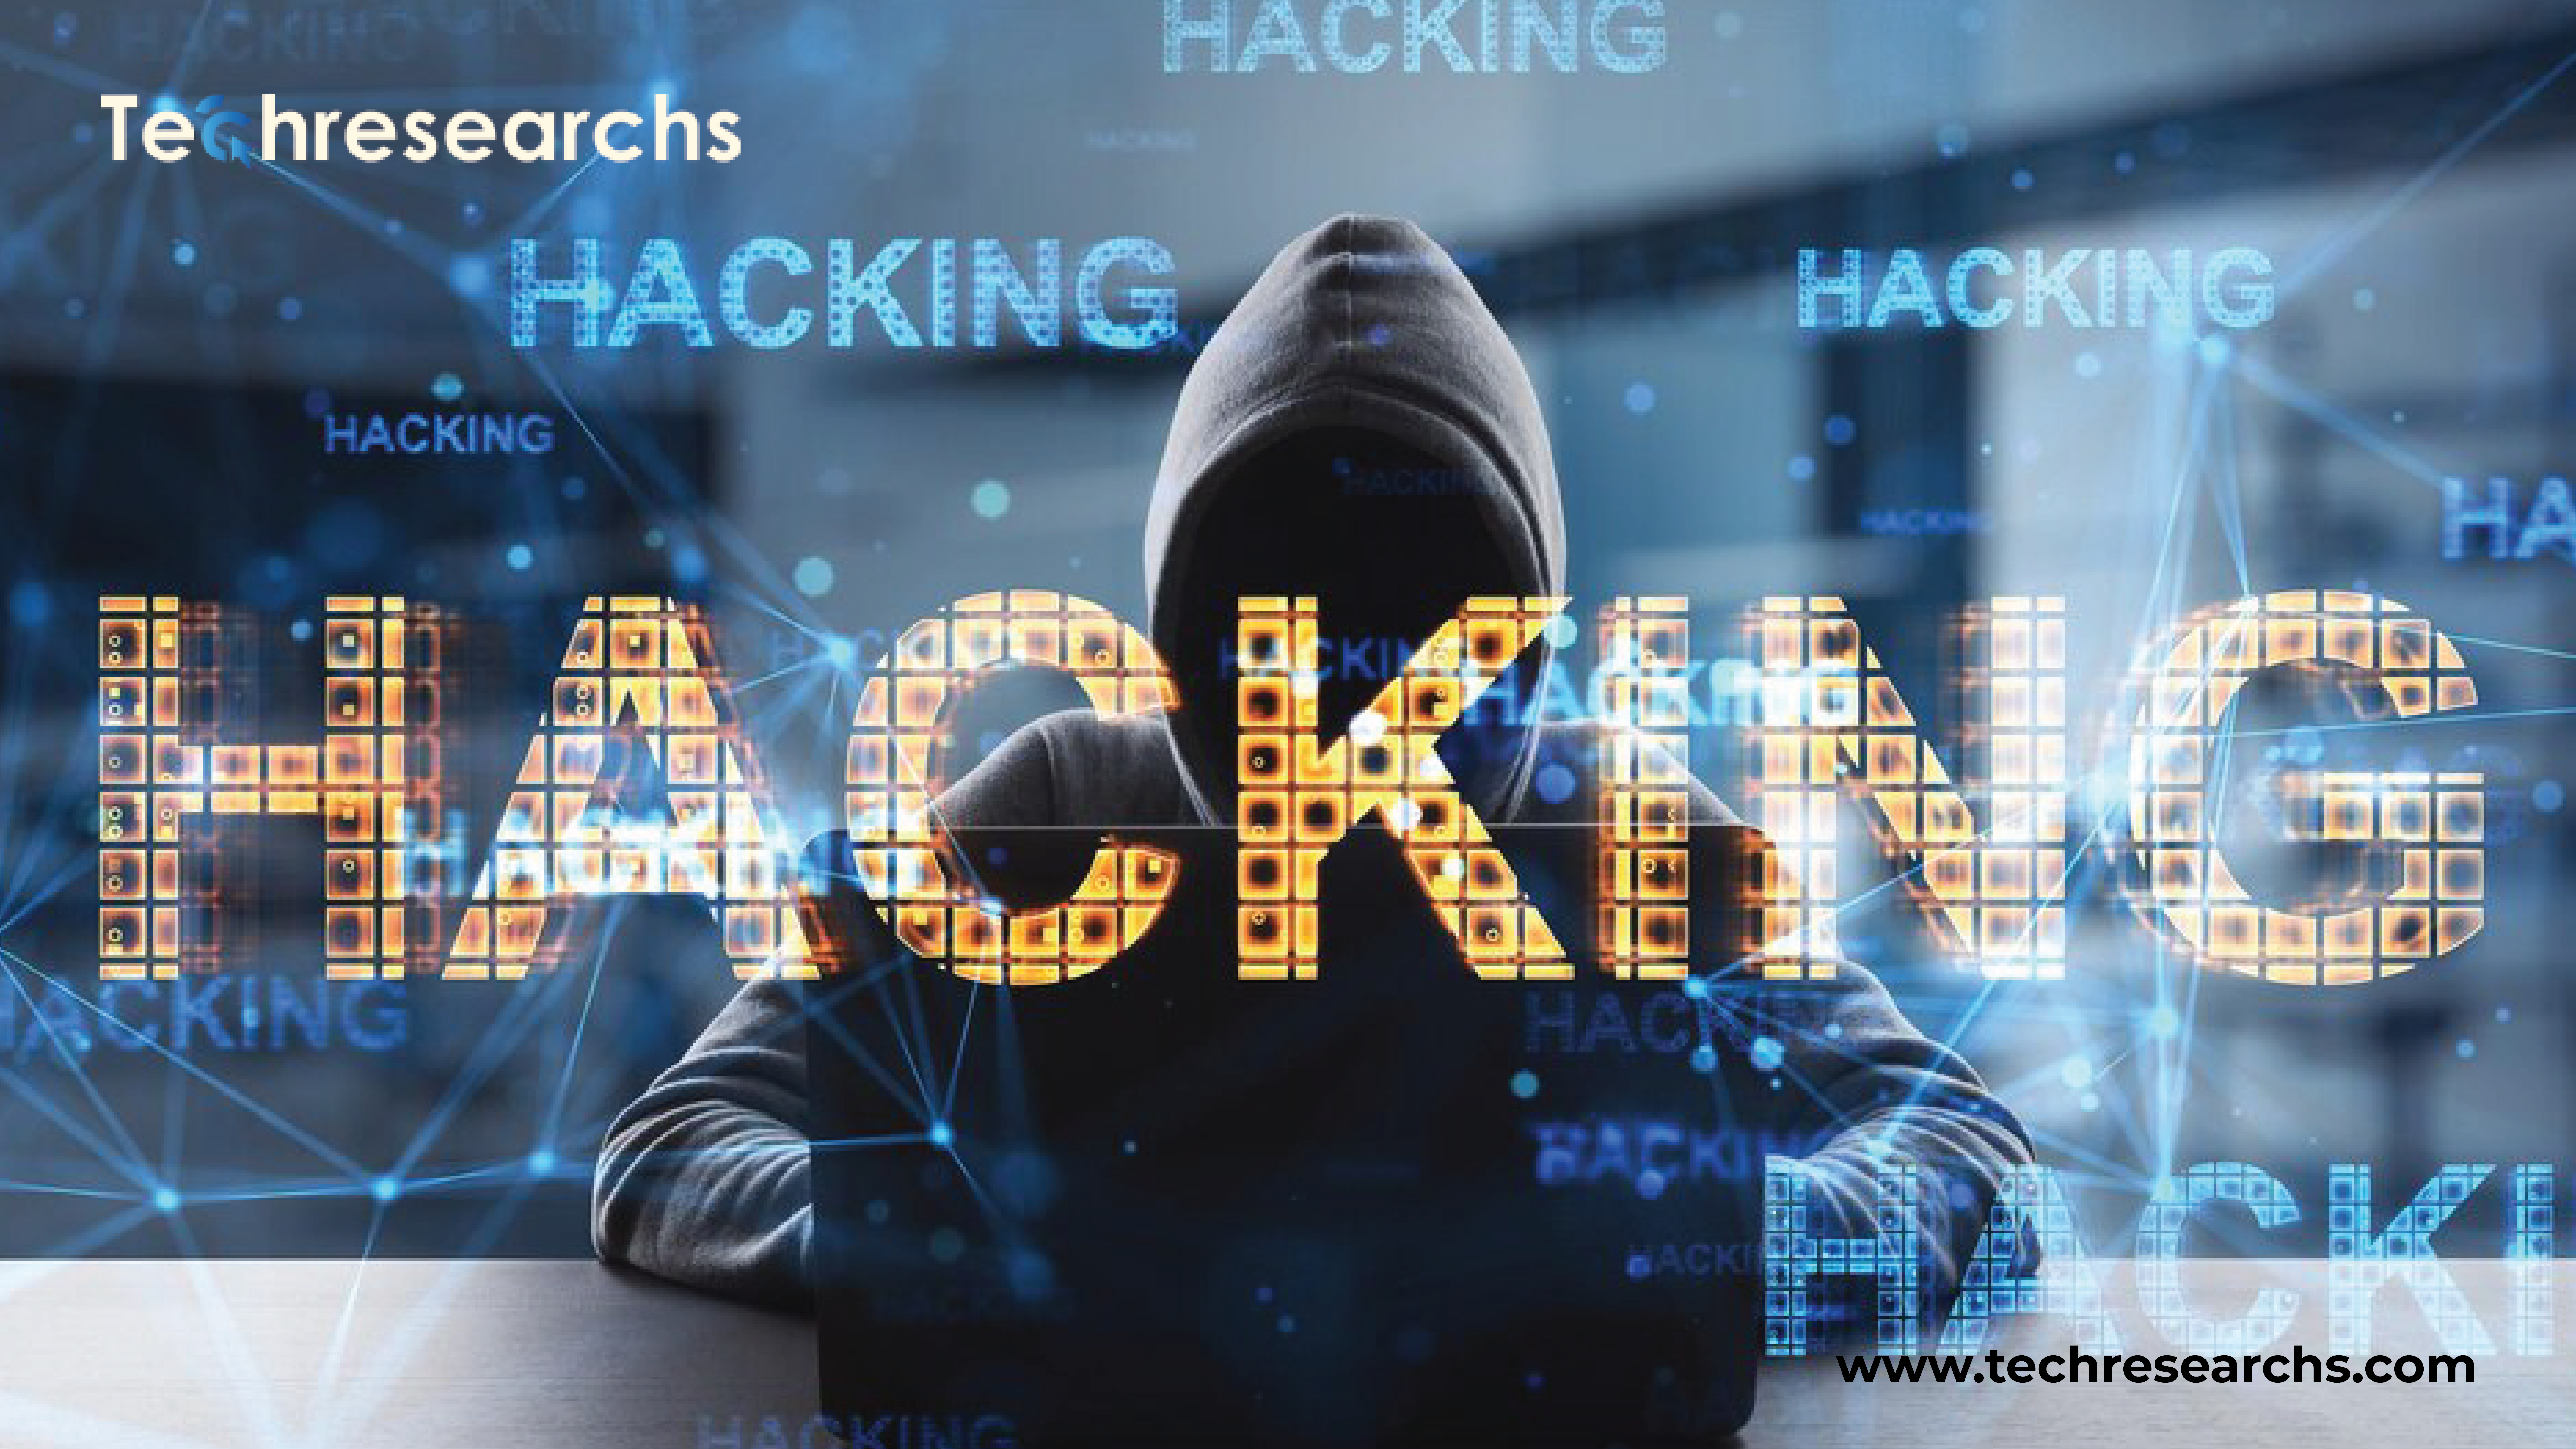 A pic showing ethical hacking